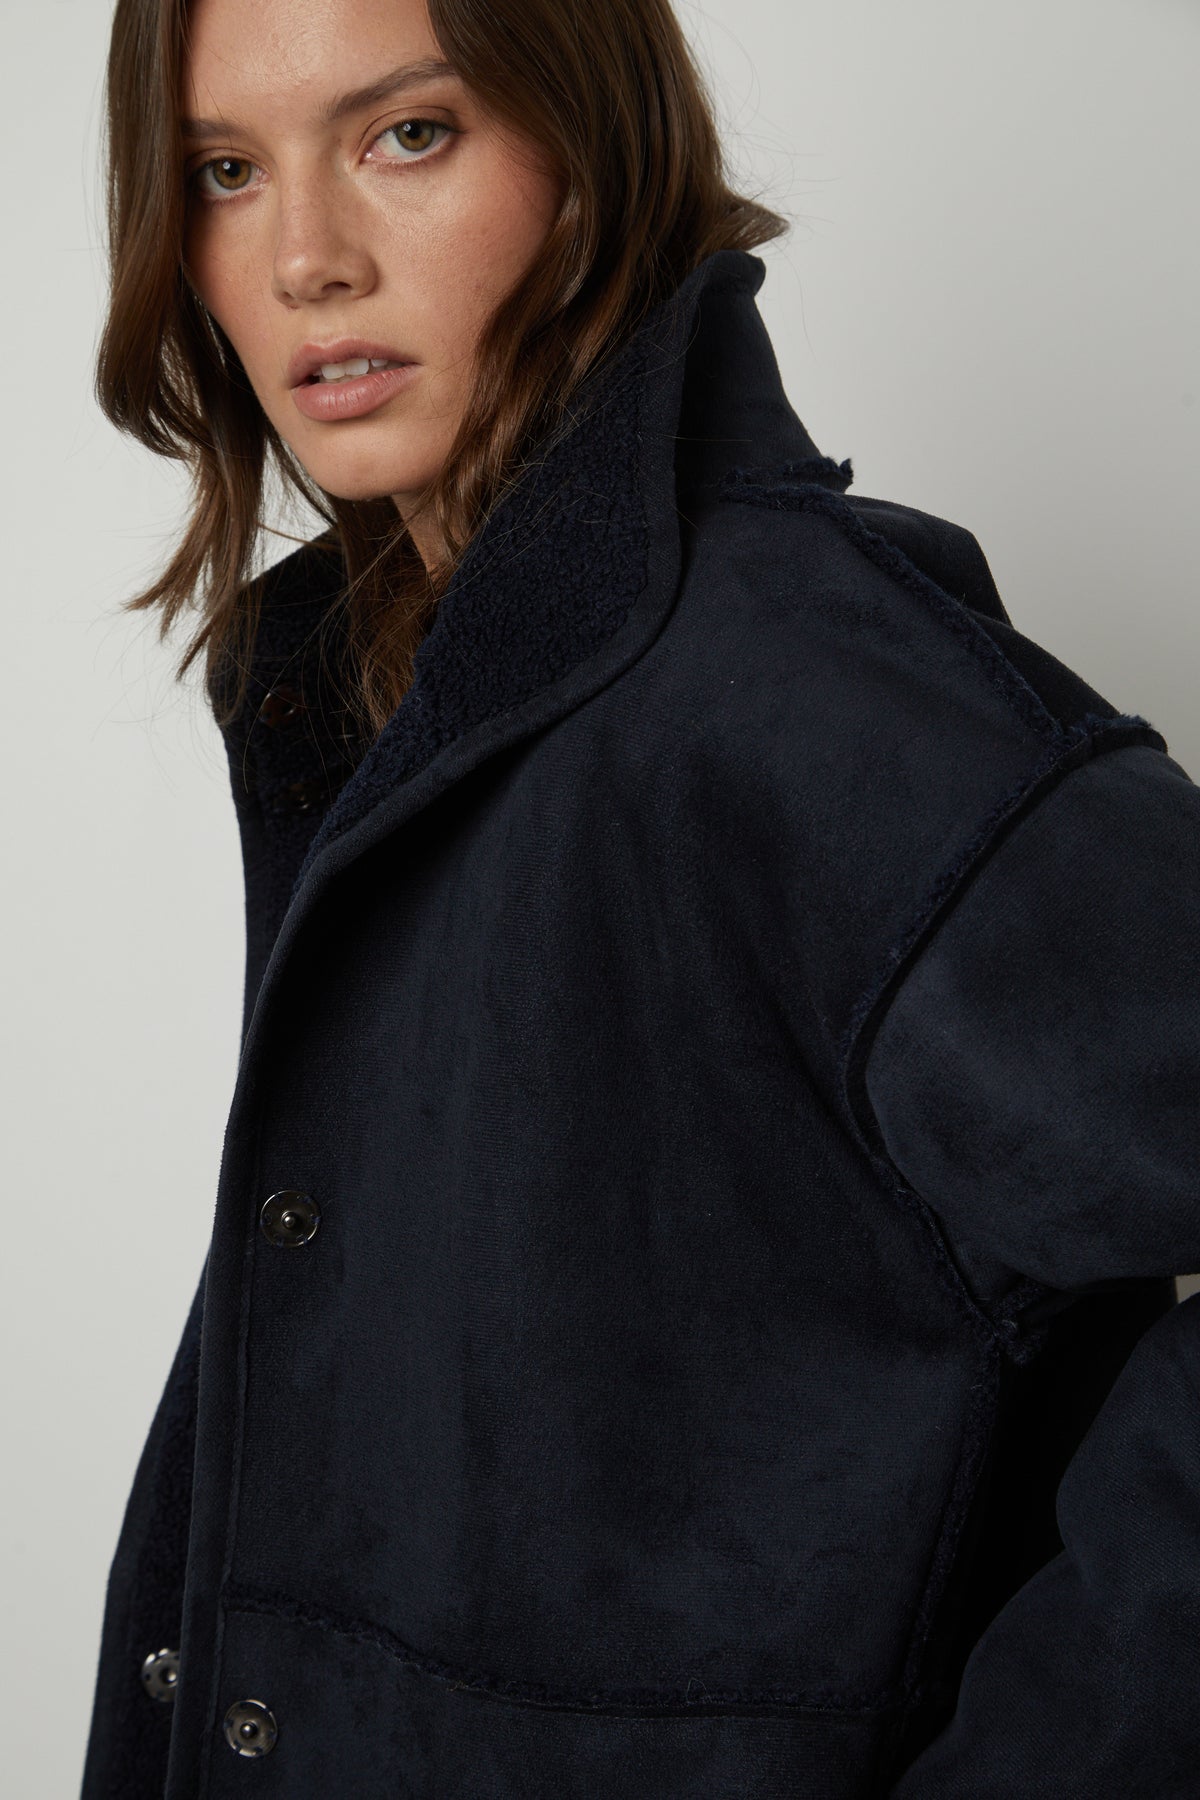   The model is wearing a Velvet by Graham & Spencer CARA LUX SHERPA REVERSIBLE JACKET. 